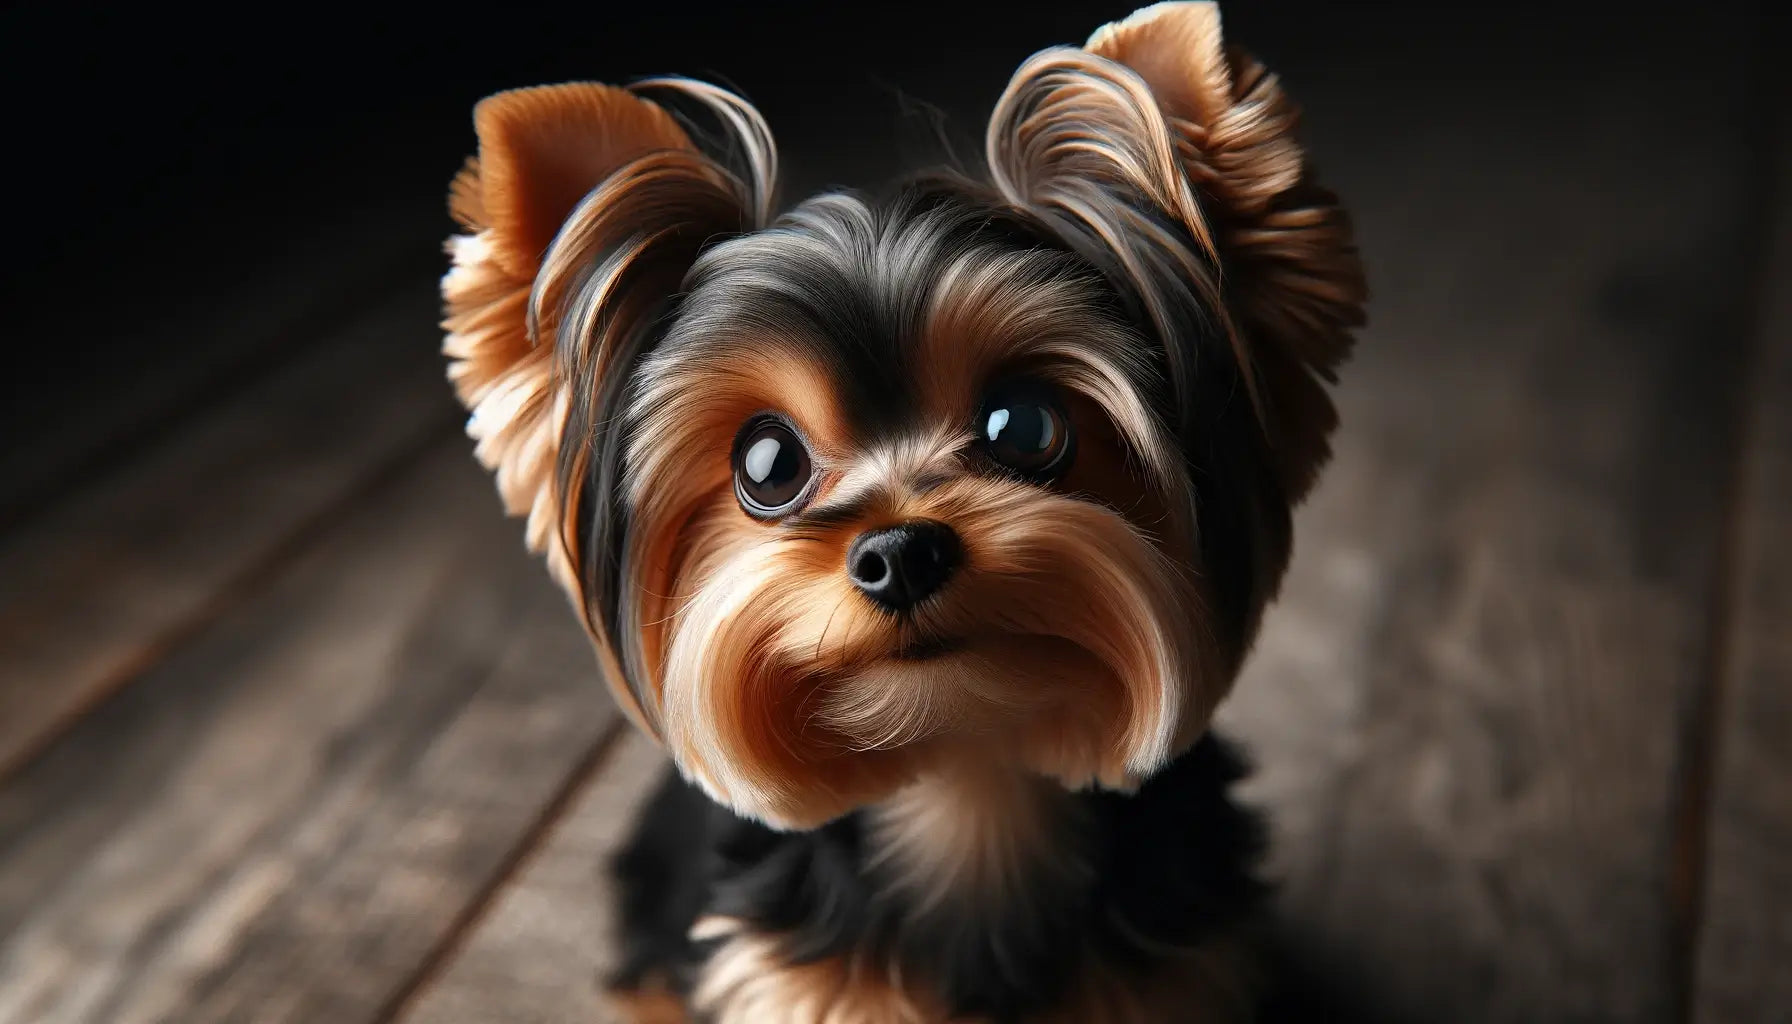 A Teacup Yorkie looks up with endearing eyes.